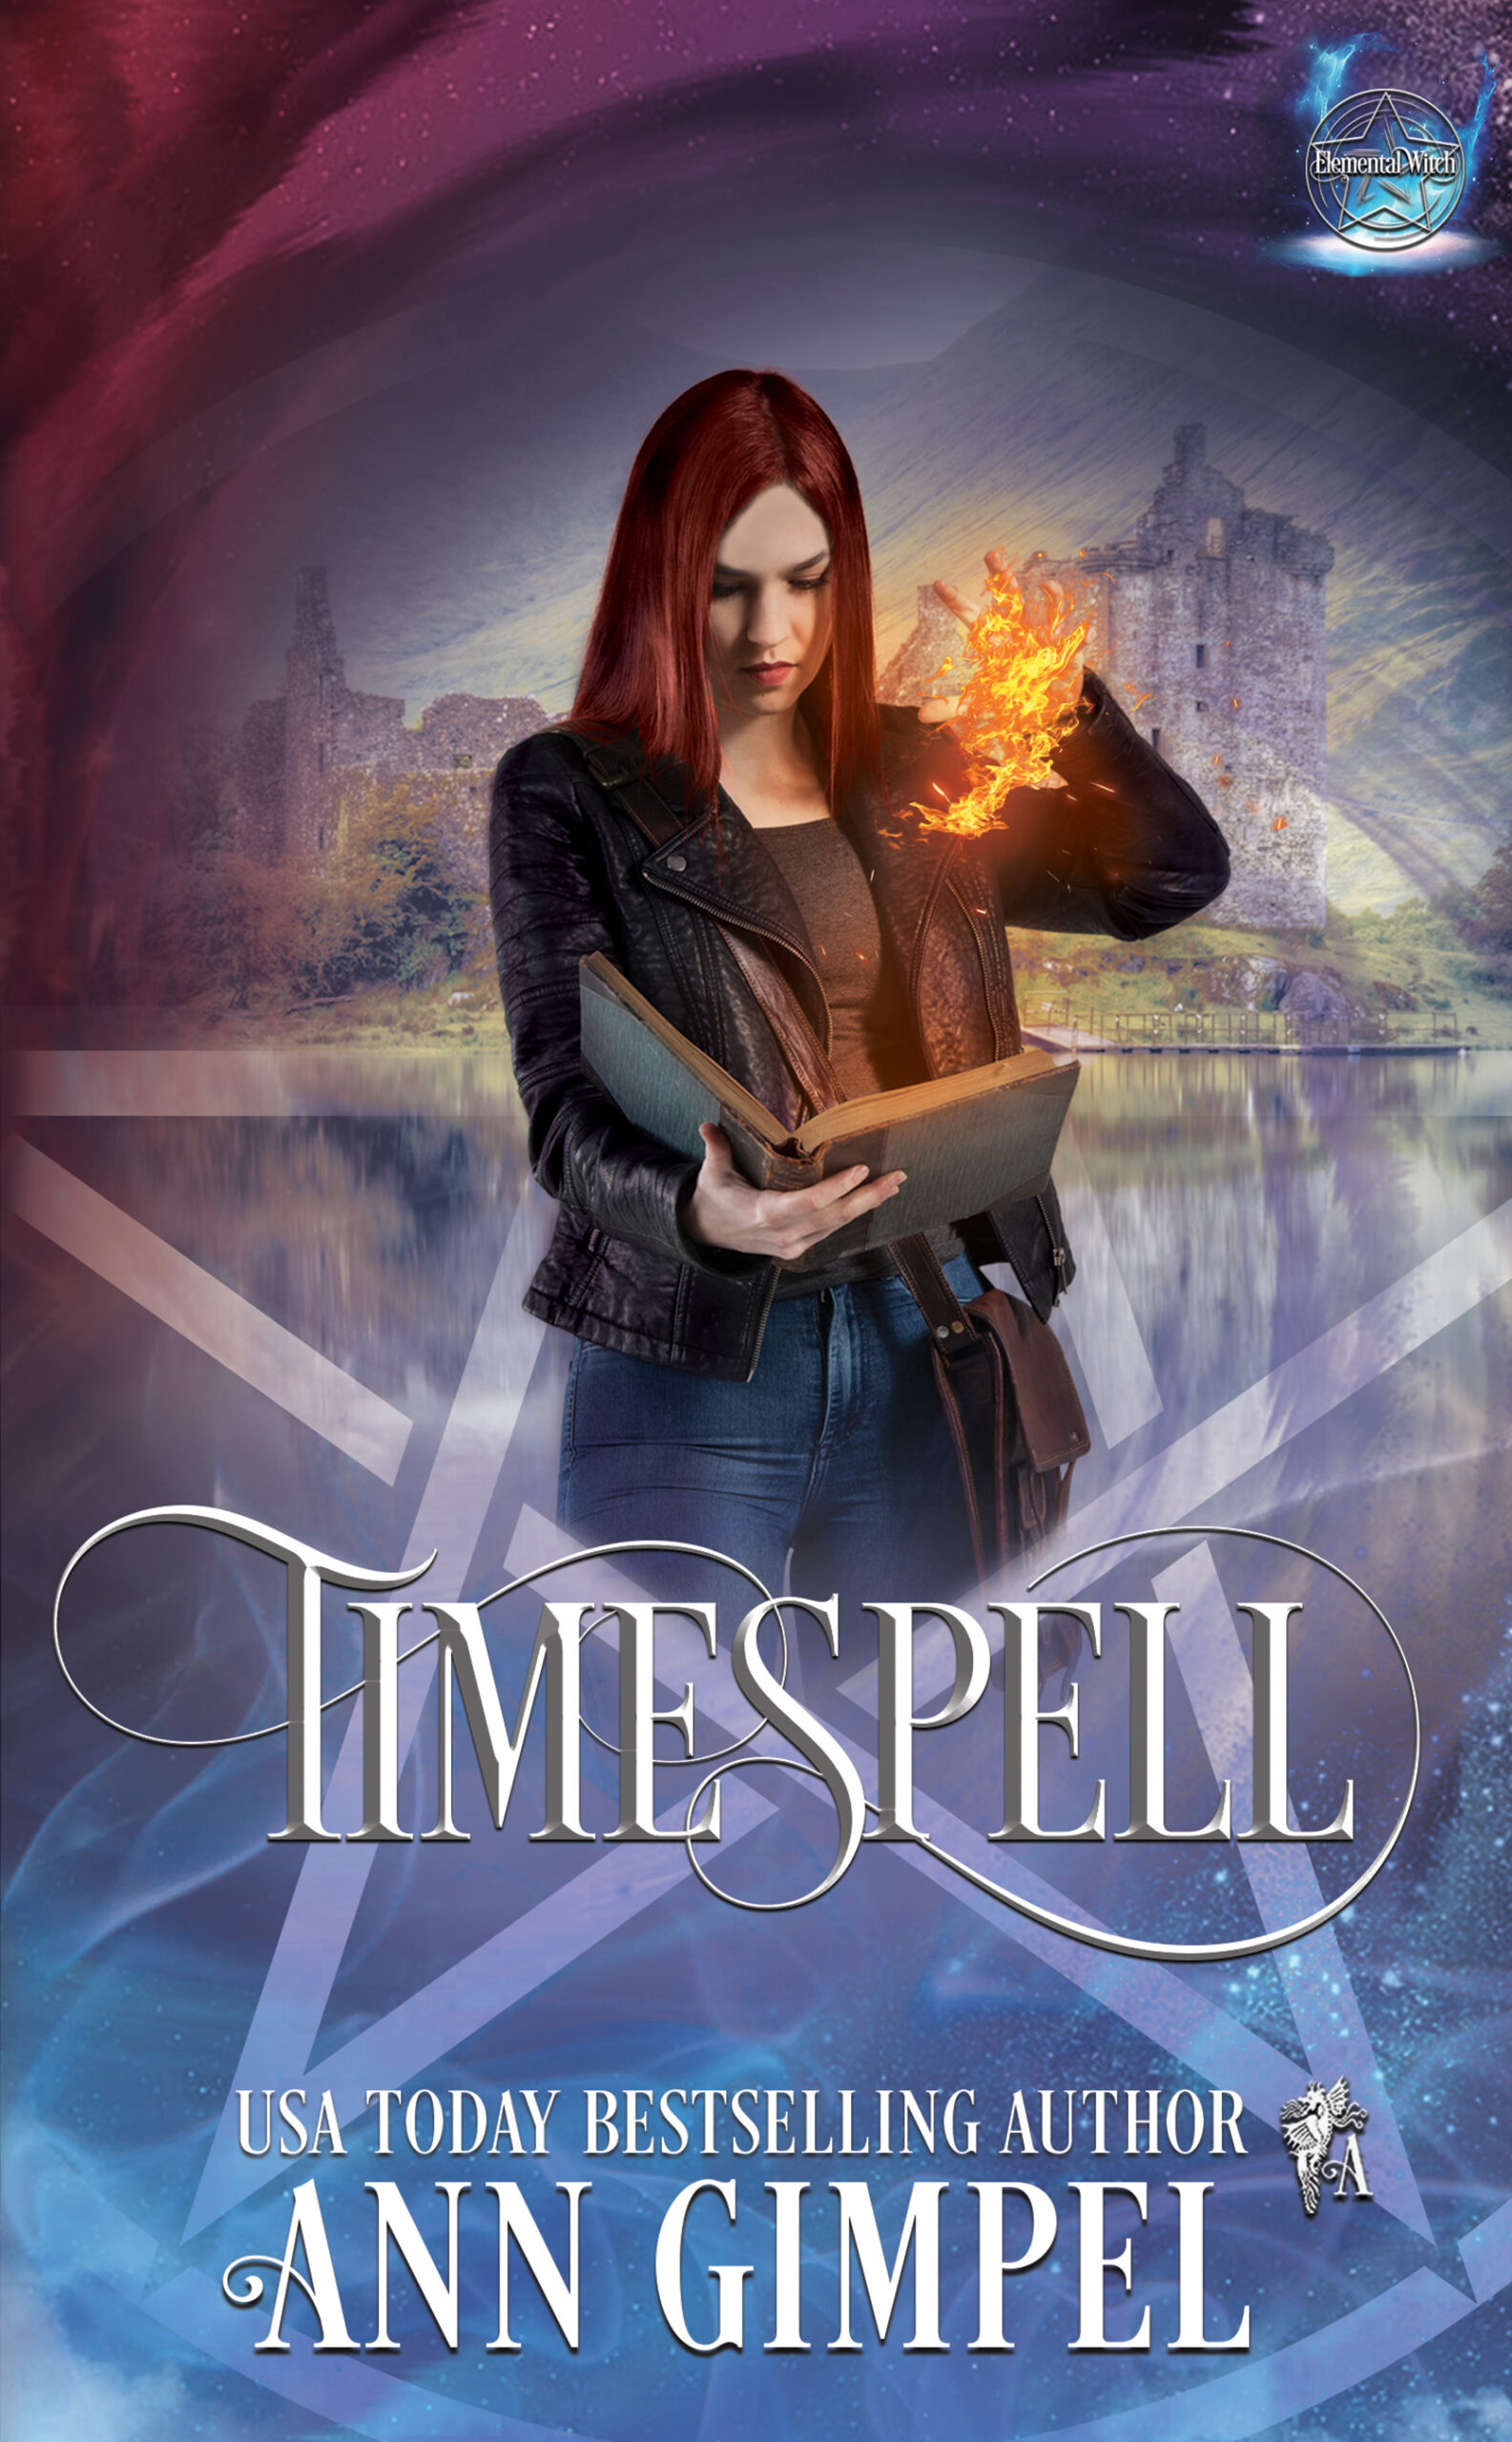 Timespell, Elemental Witch Book One